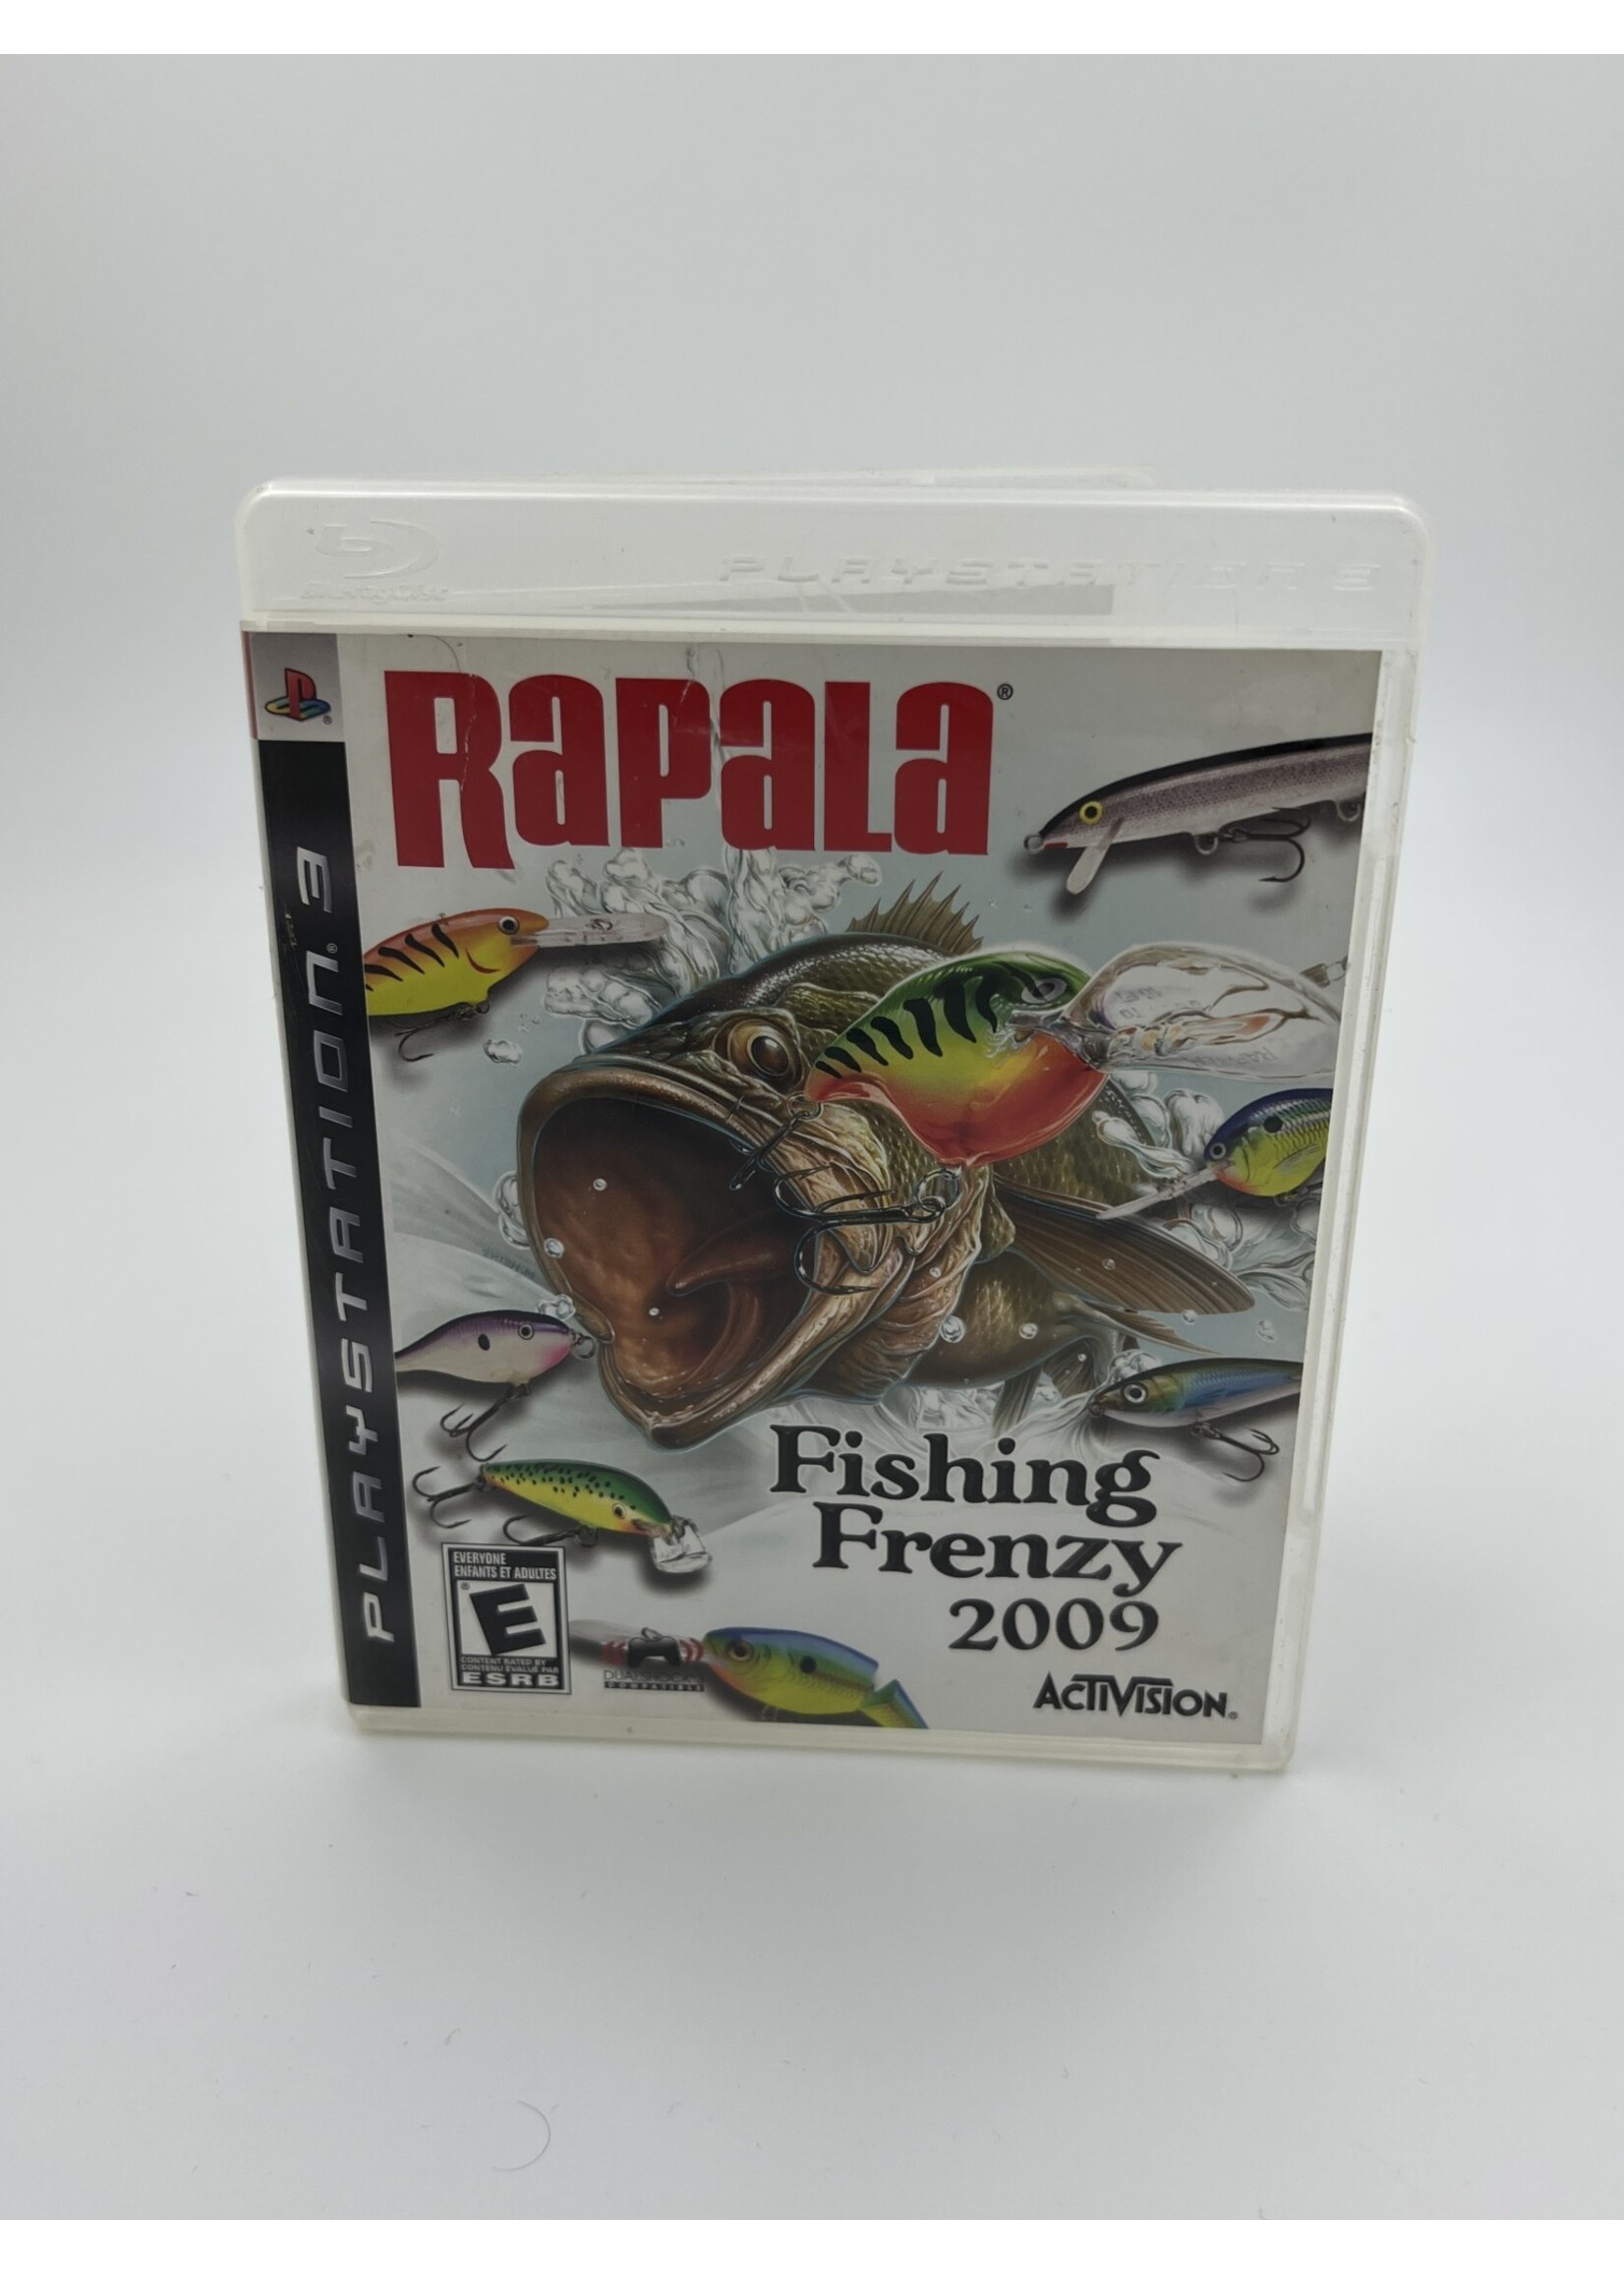 Sony PlayStation 3 Rapala: Fishing Frenzy 2009 Video Games for sale